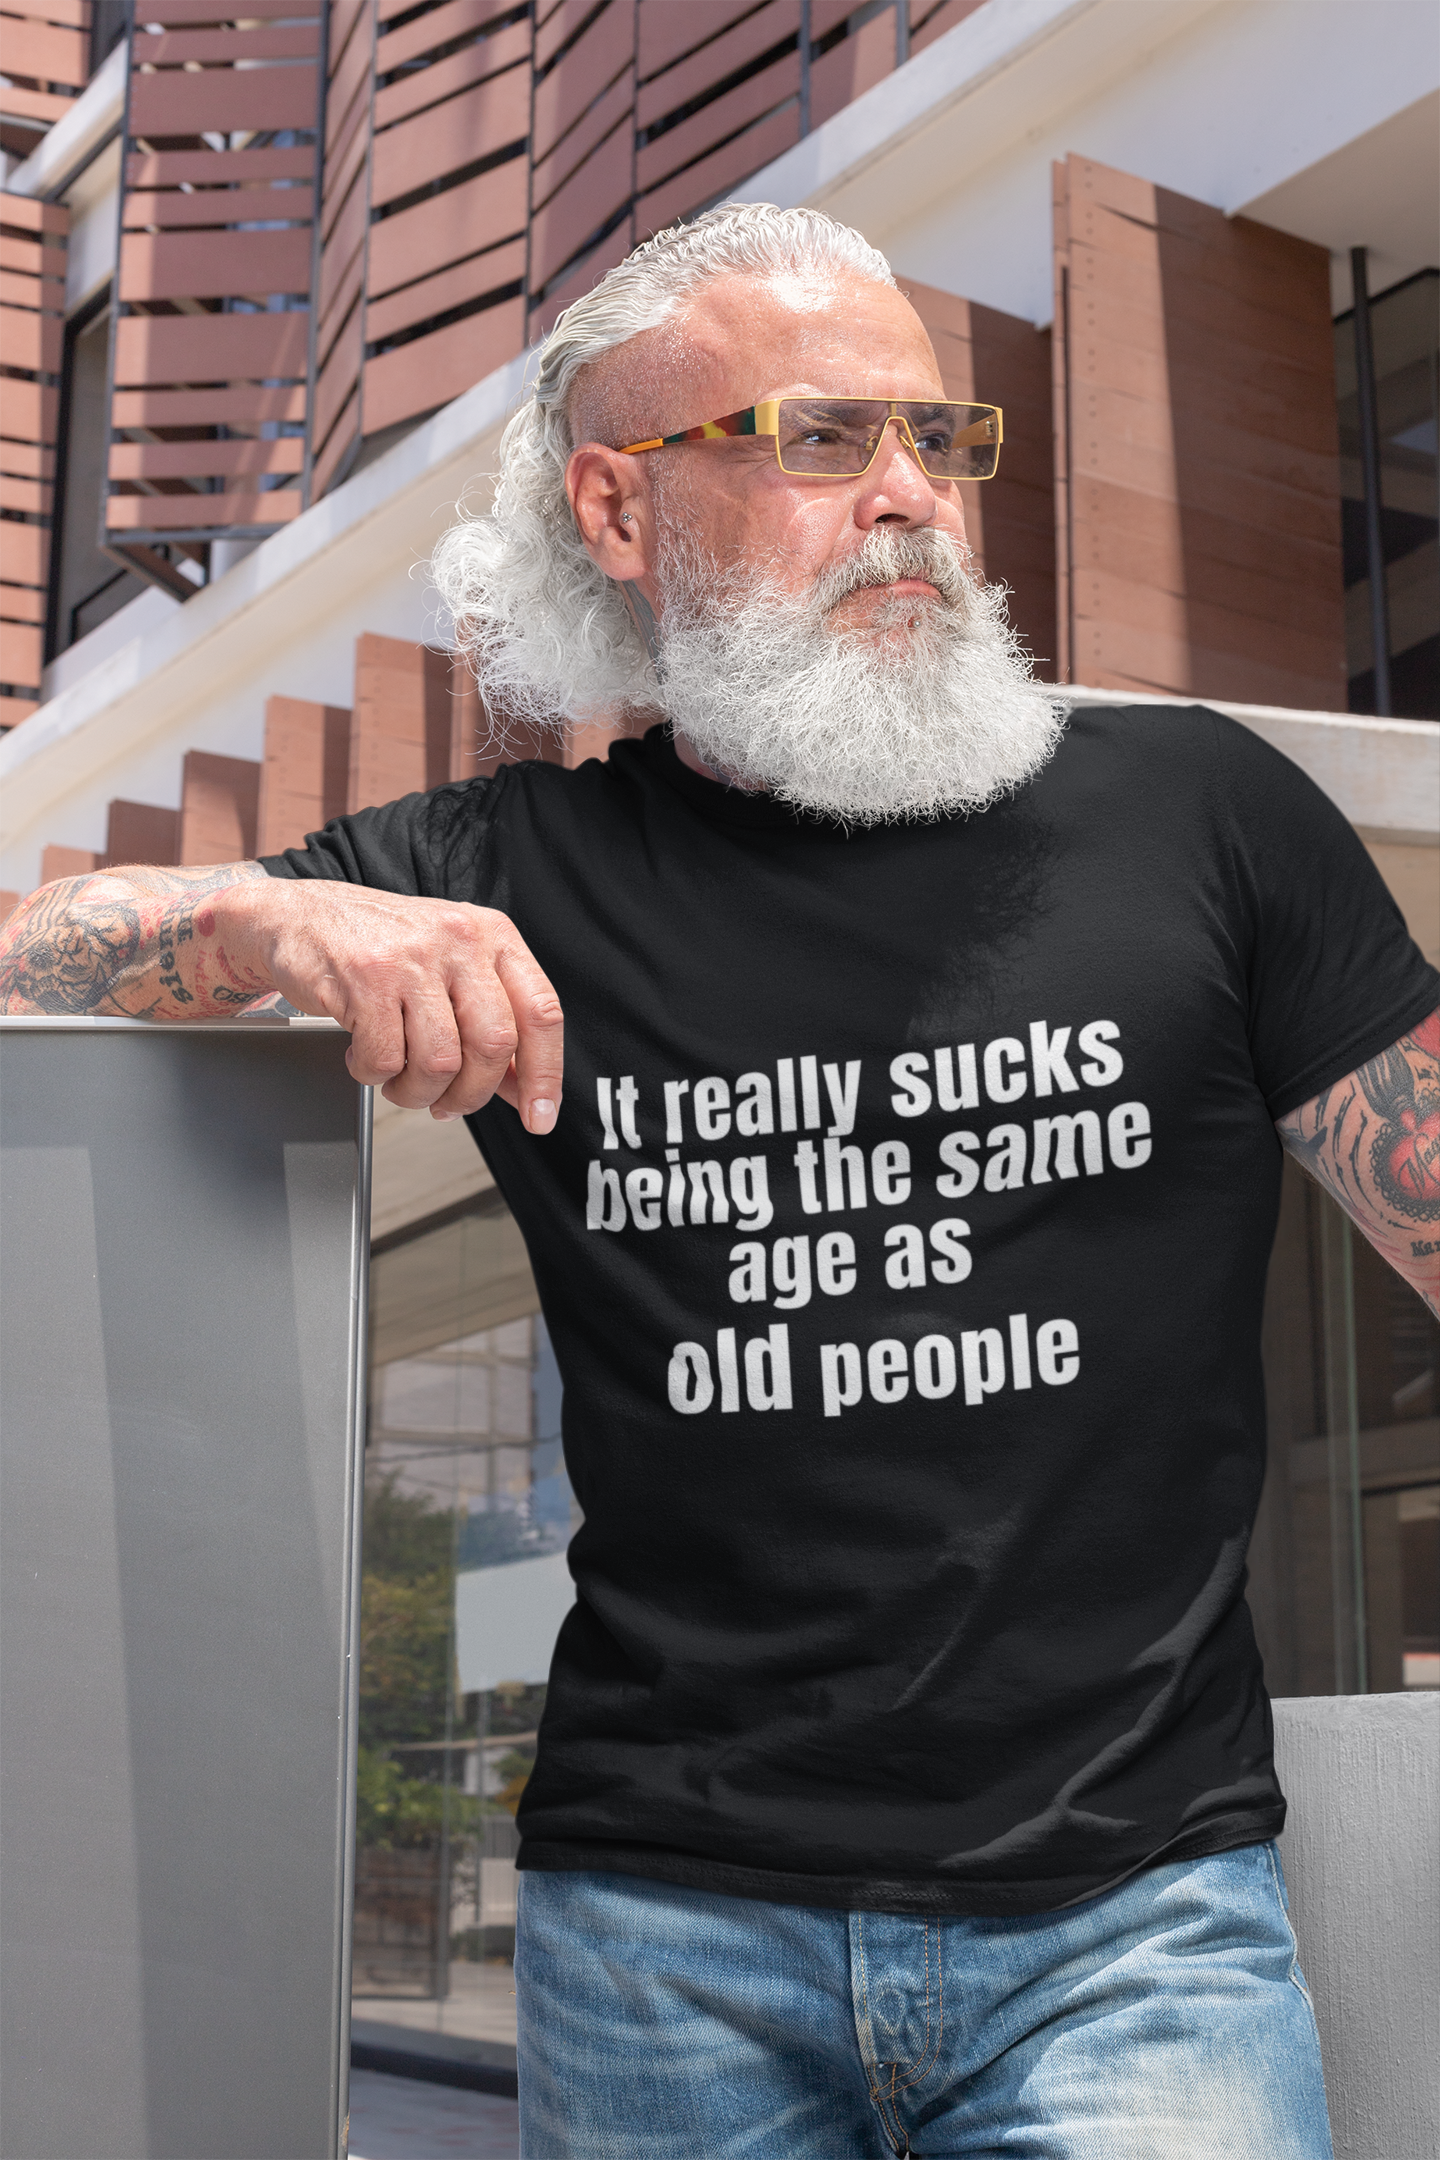 It really sucks being the same age as old people 2- Unisex T-Shirt birthday gift boyfriend gift Christmas gift co-worker gift coworker gift dads day gift Fathers Day Shirt fiance gift funny shirt gift for boyfriend gift for dad gift for grandpa gift for her gift for him gift for husband gift for mom gift for sister gift for wife gift idea girlfriend gift Husband Gift moms gift mothers day gift Mothers Day shirt school gift T-Shirt teacher gift Unique gift wife gift